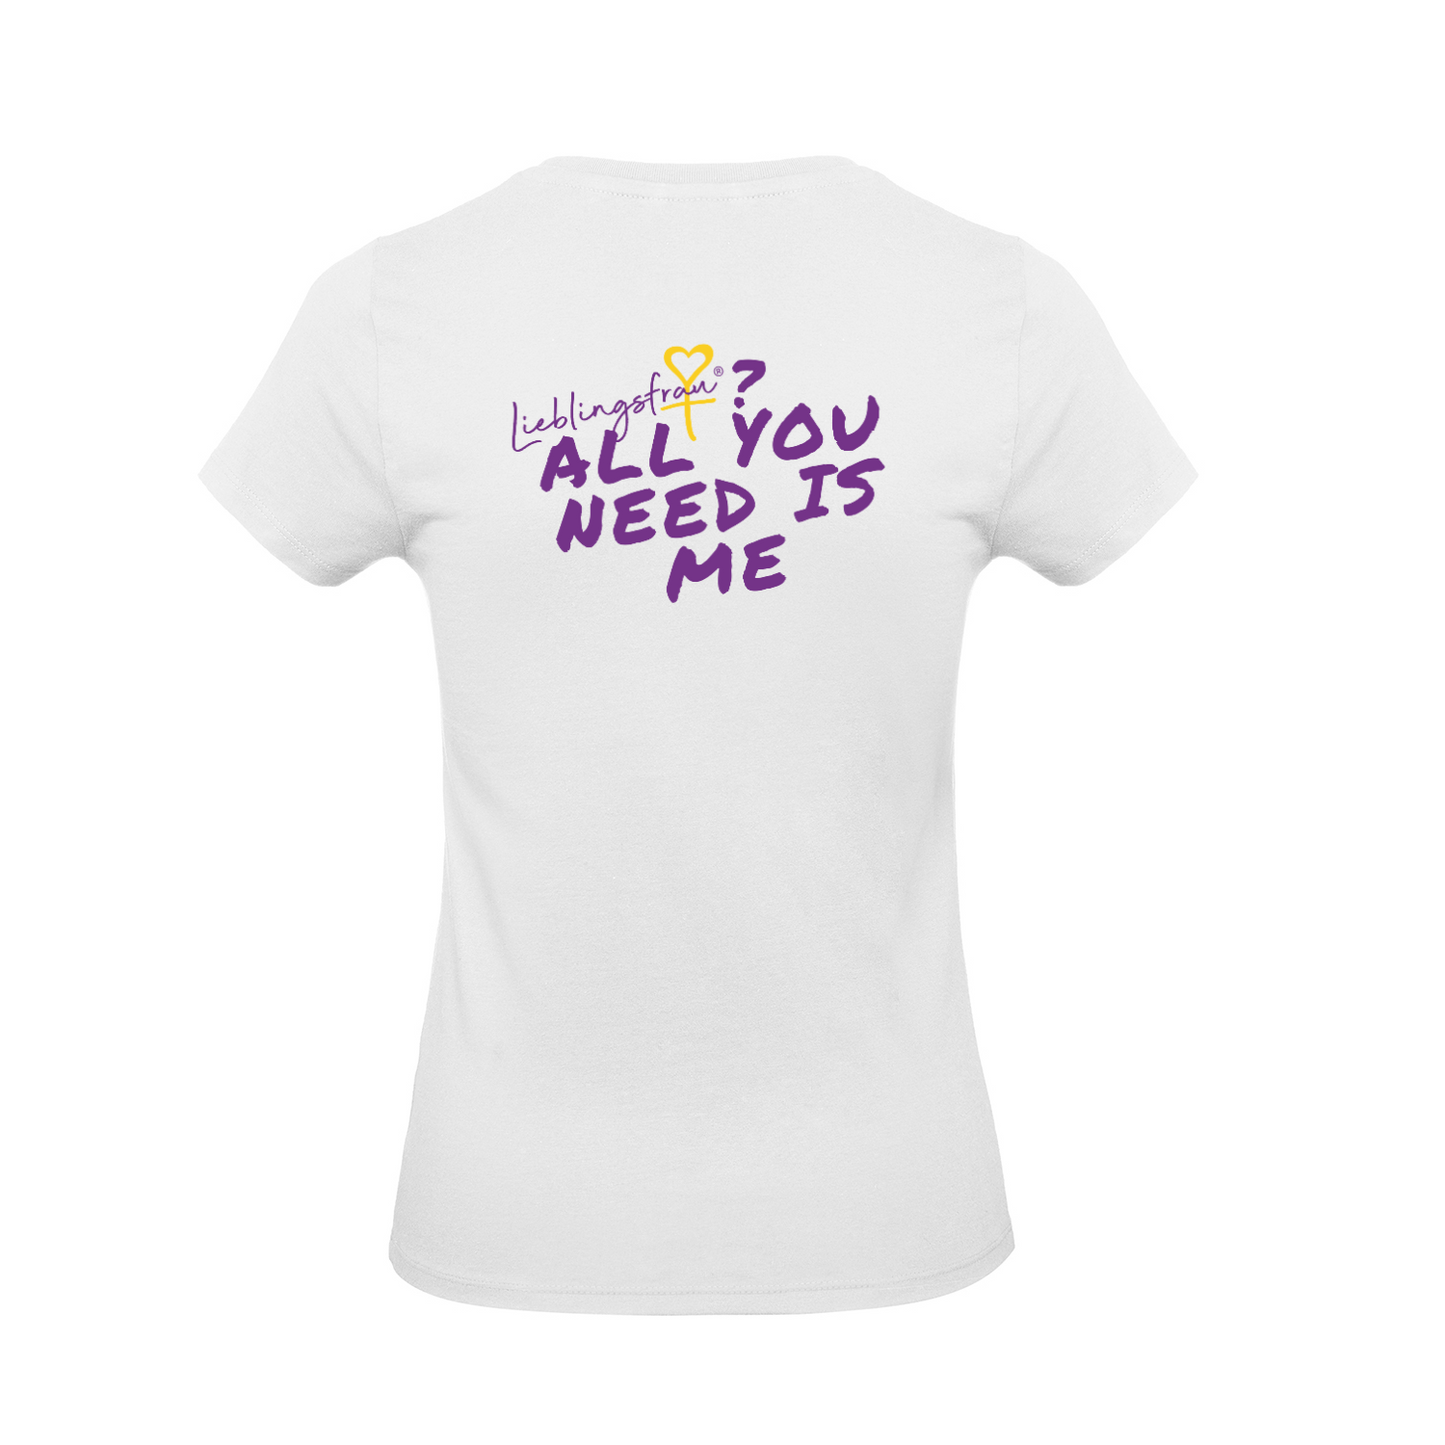 All you need is me T-SHIRT